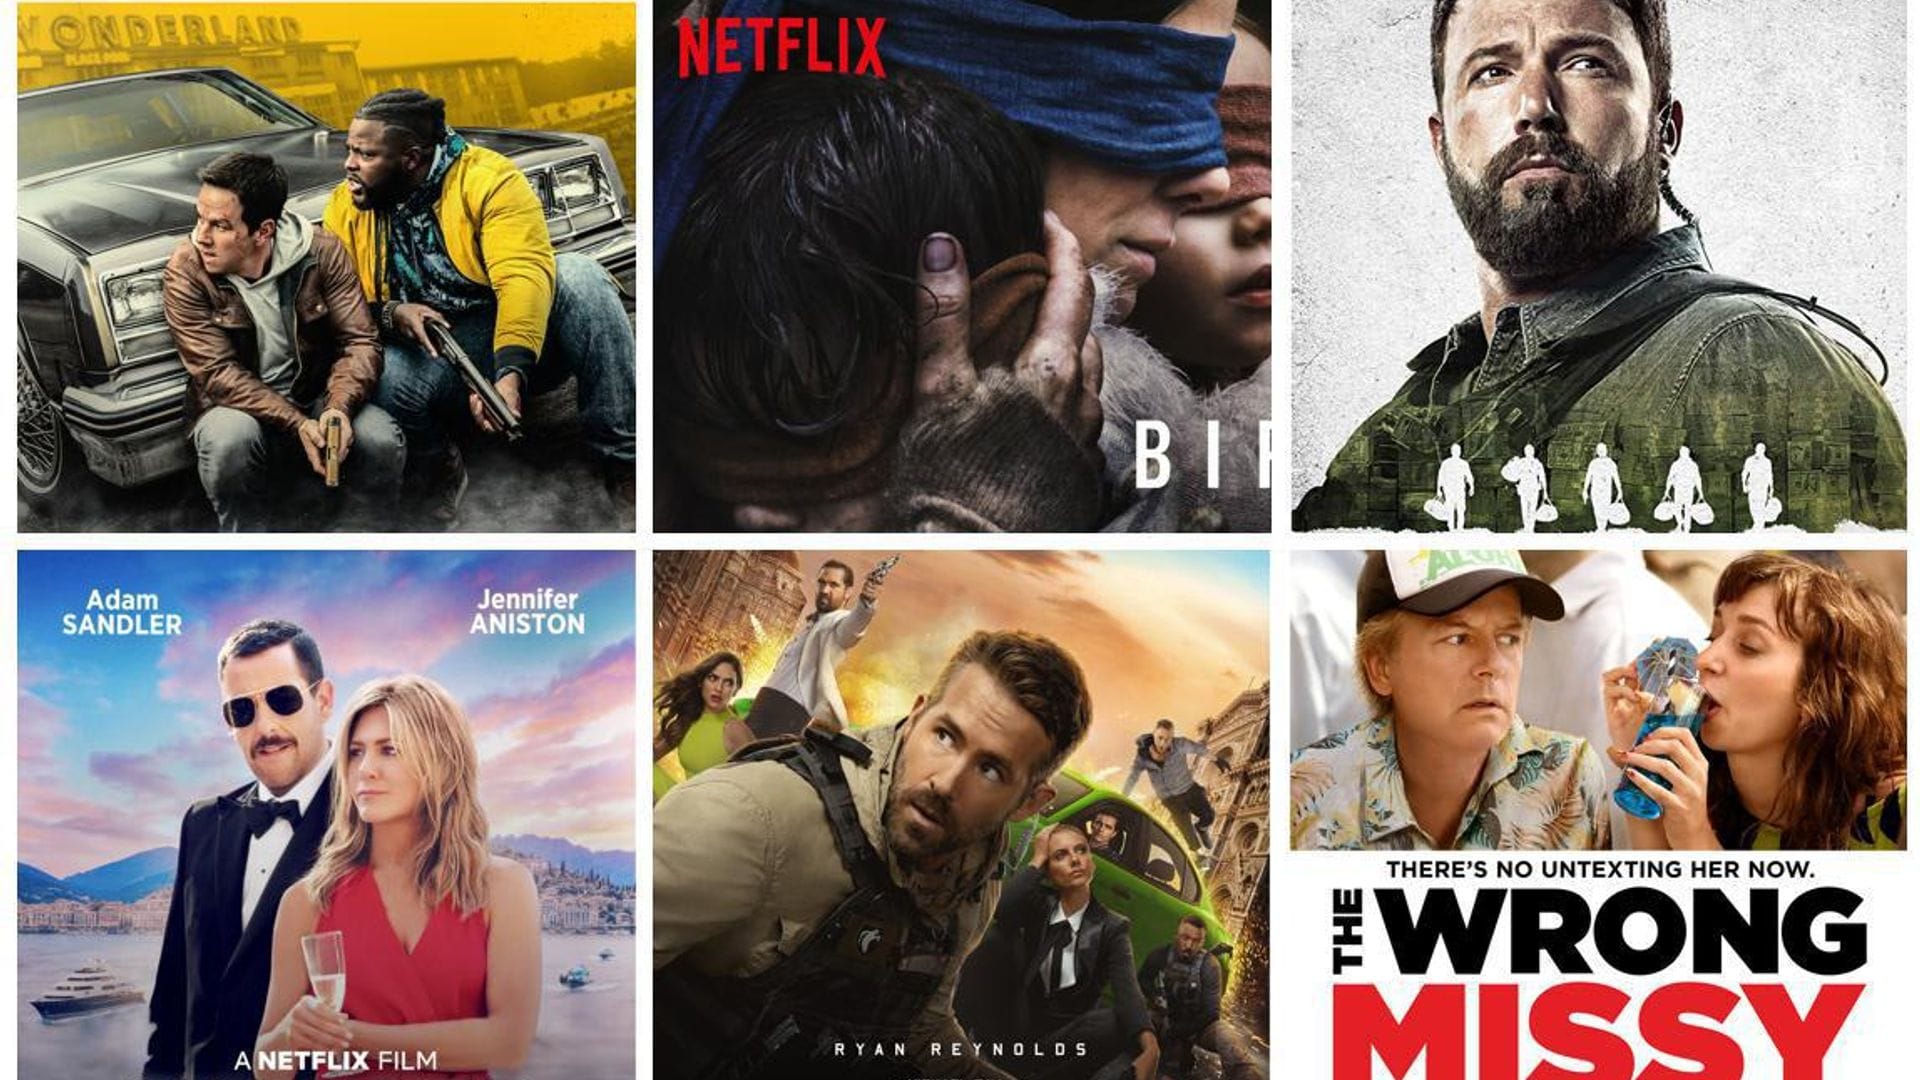 The top 10 most viewed movies on Netflix